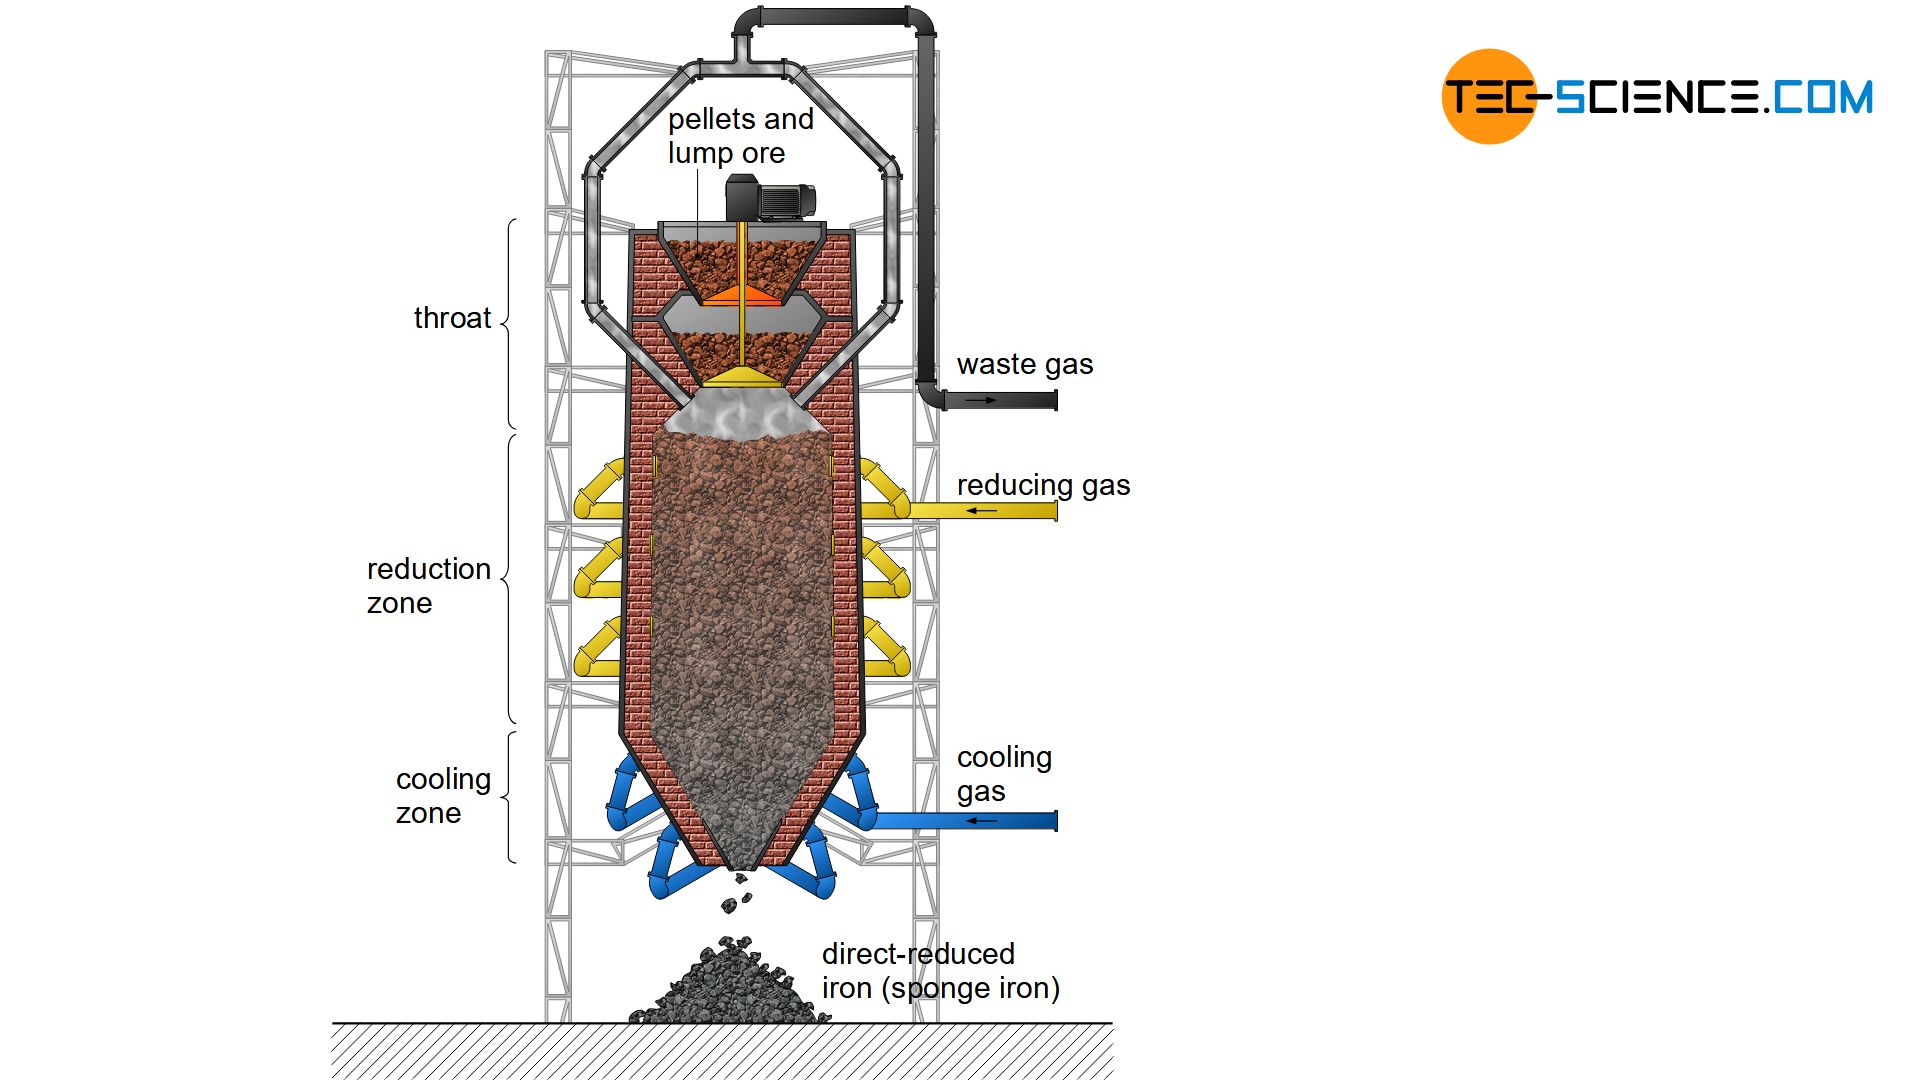 Shaft furnace for the direct reduced iron process